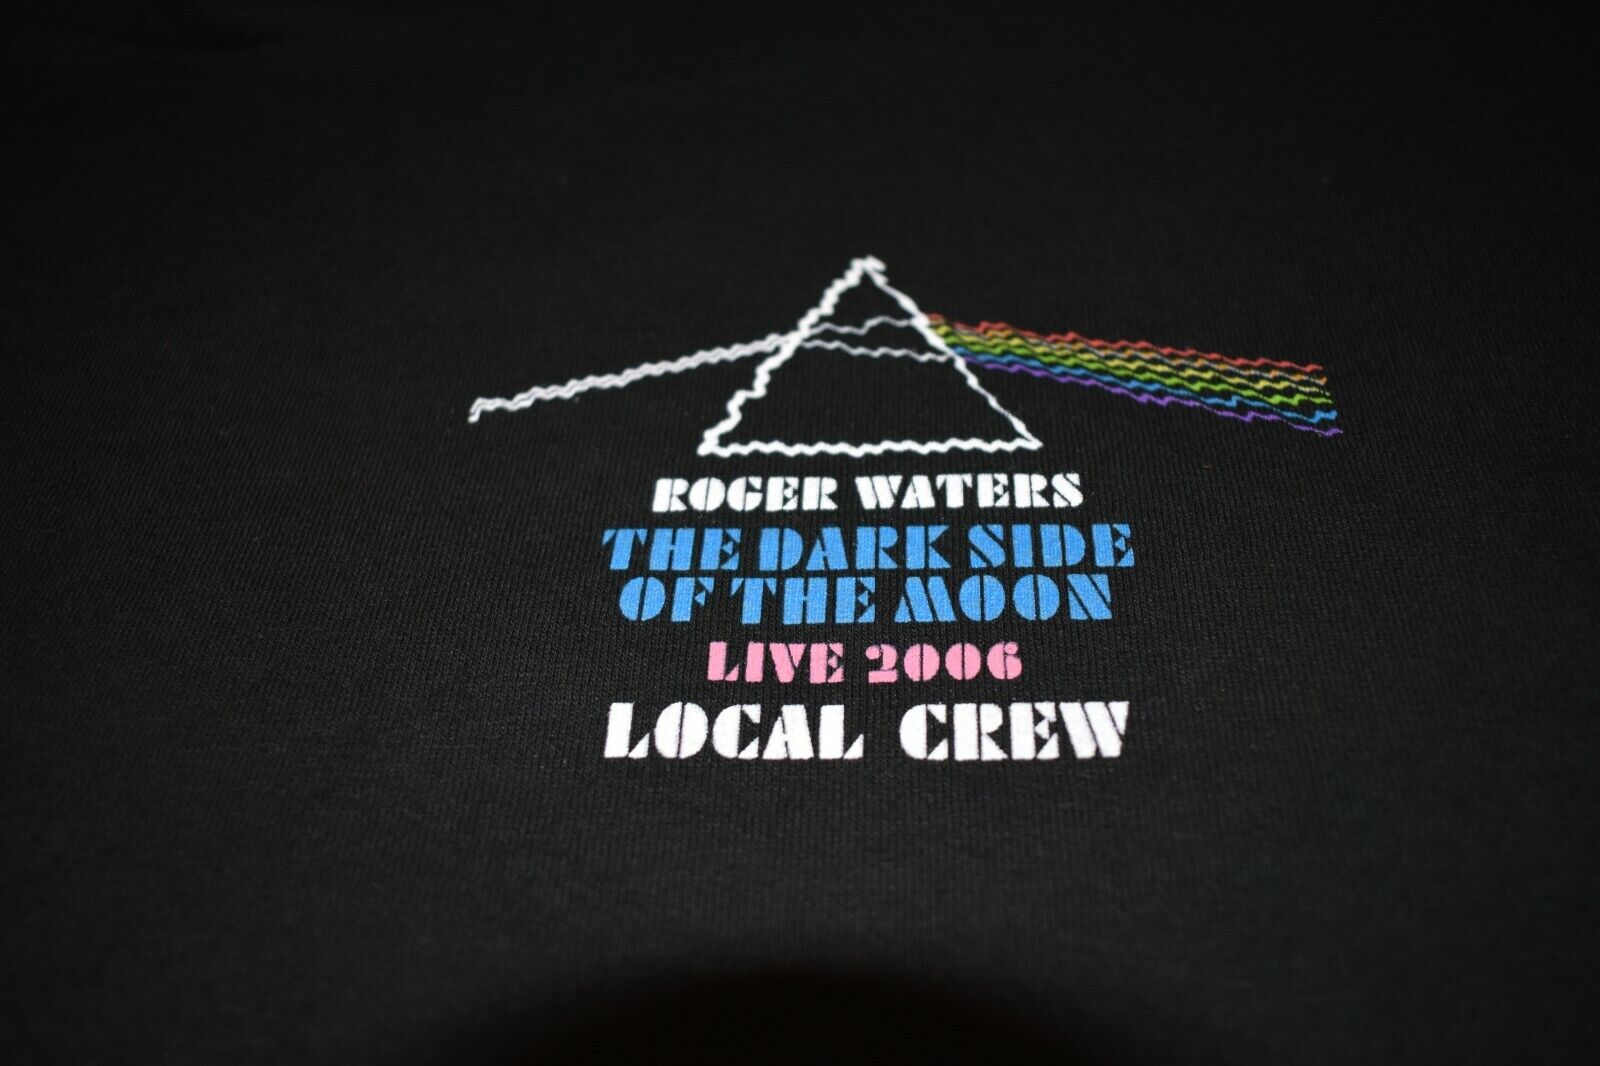 2006 2007 Roger Waters Dsotm Tour Local Crew Shirt Xl Pink Floyd